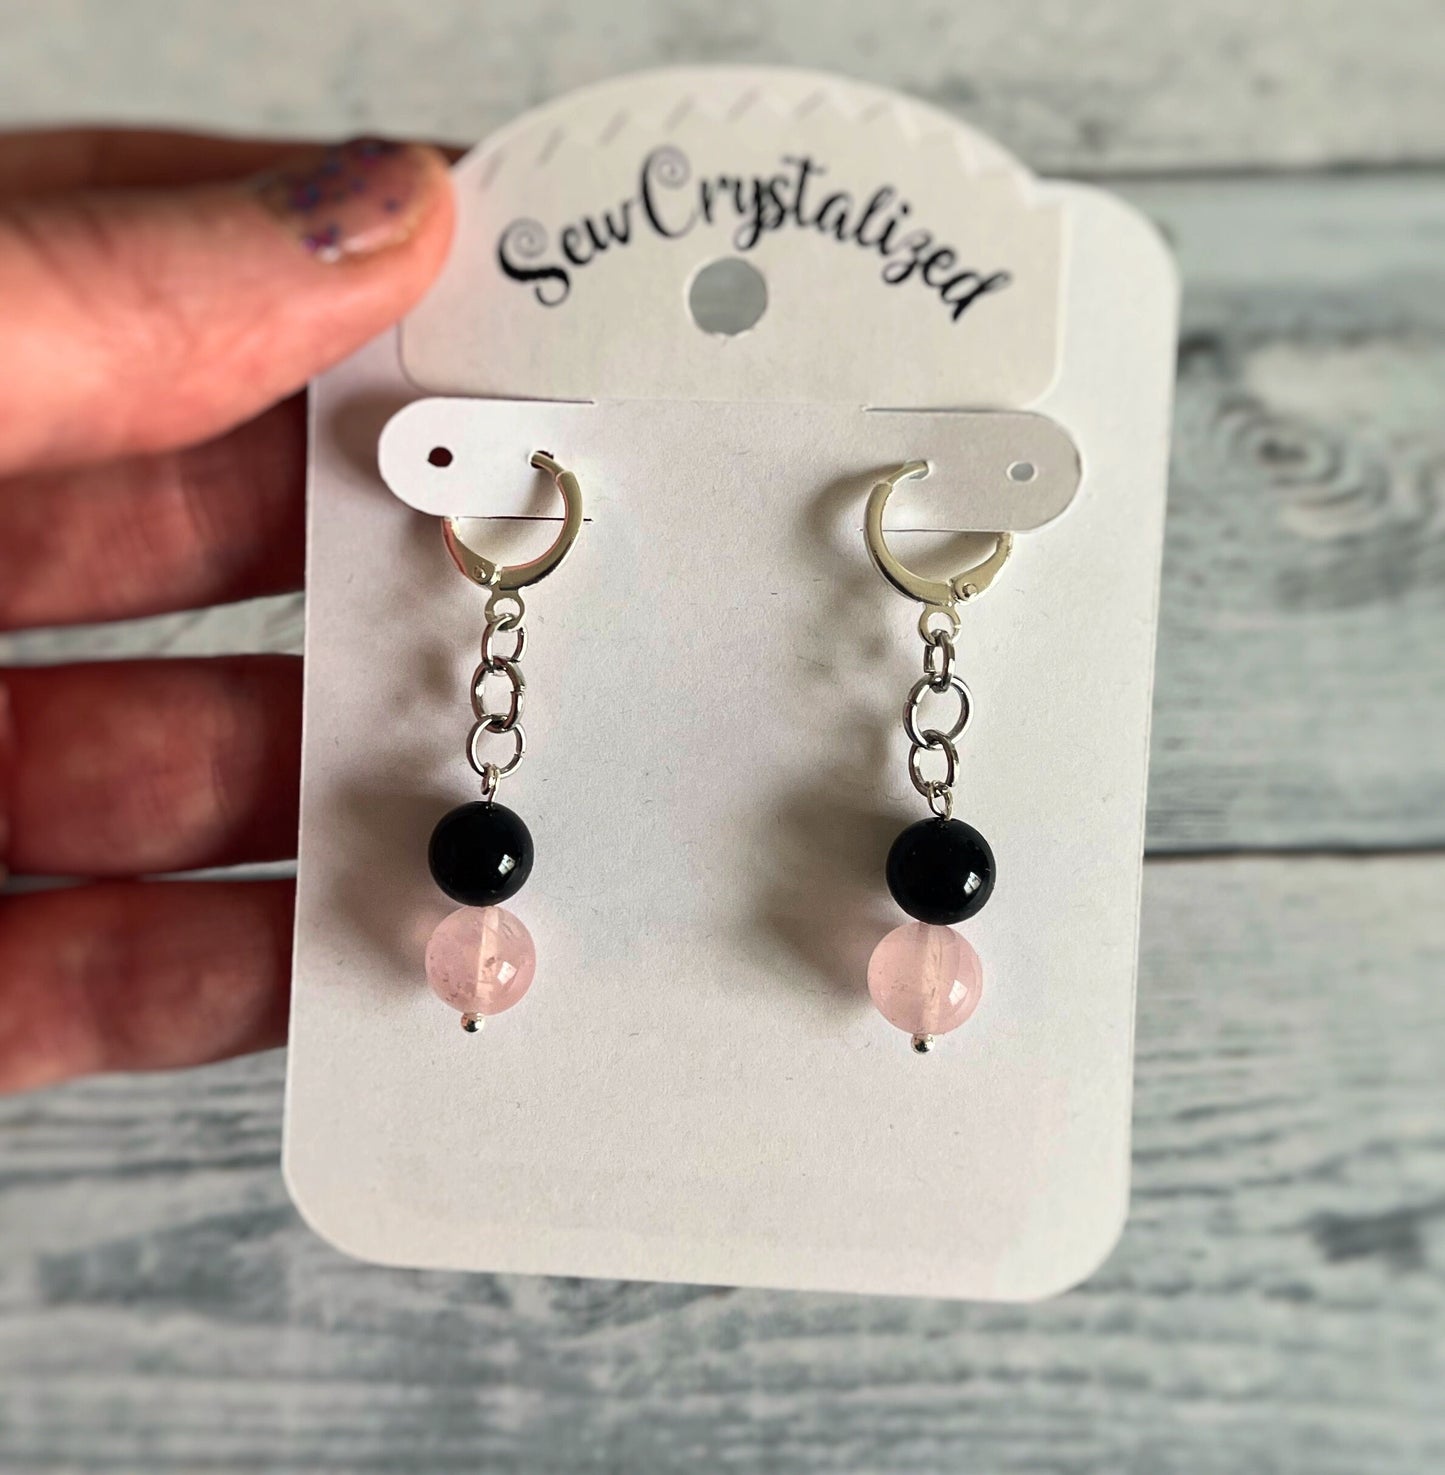 Genuine Gemstone and Faux Leather Earrings